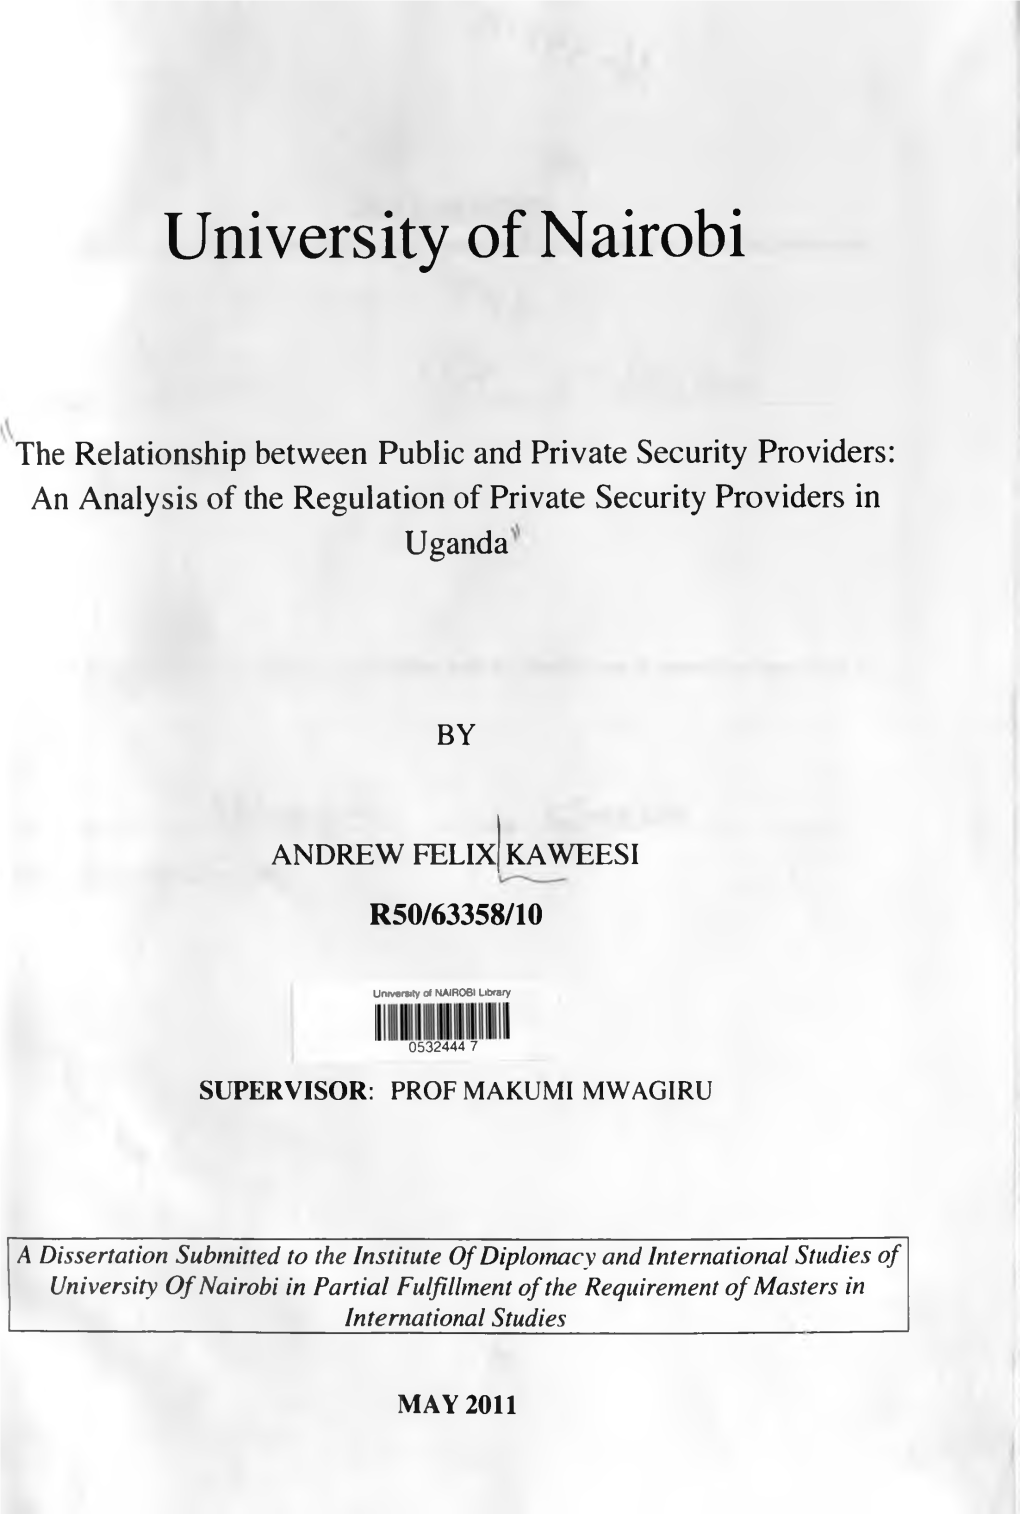 The Relationship Between Public and Private Security Providers: an Analysis of the Regulation of Private Security Providers in Uganda